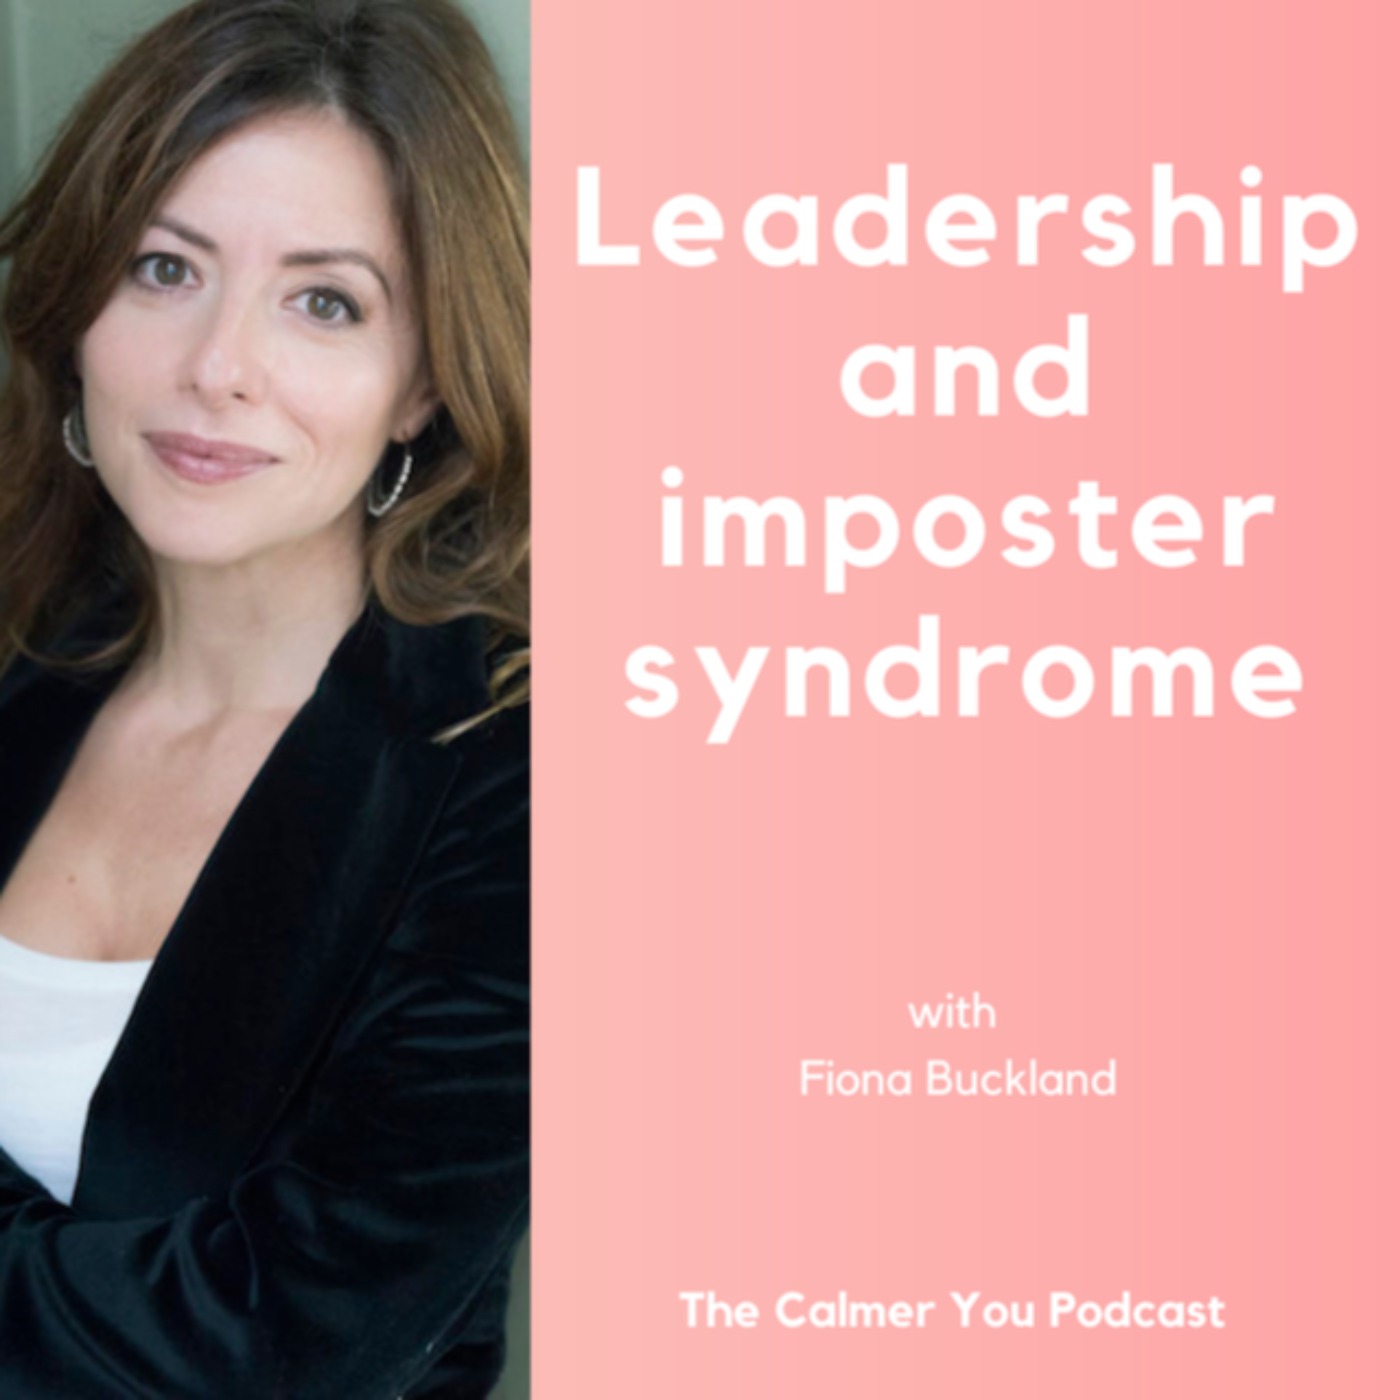 Ep 144 - Leadership and impostor syndrome with Fiona Buckland